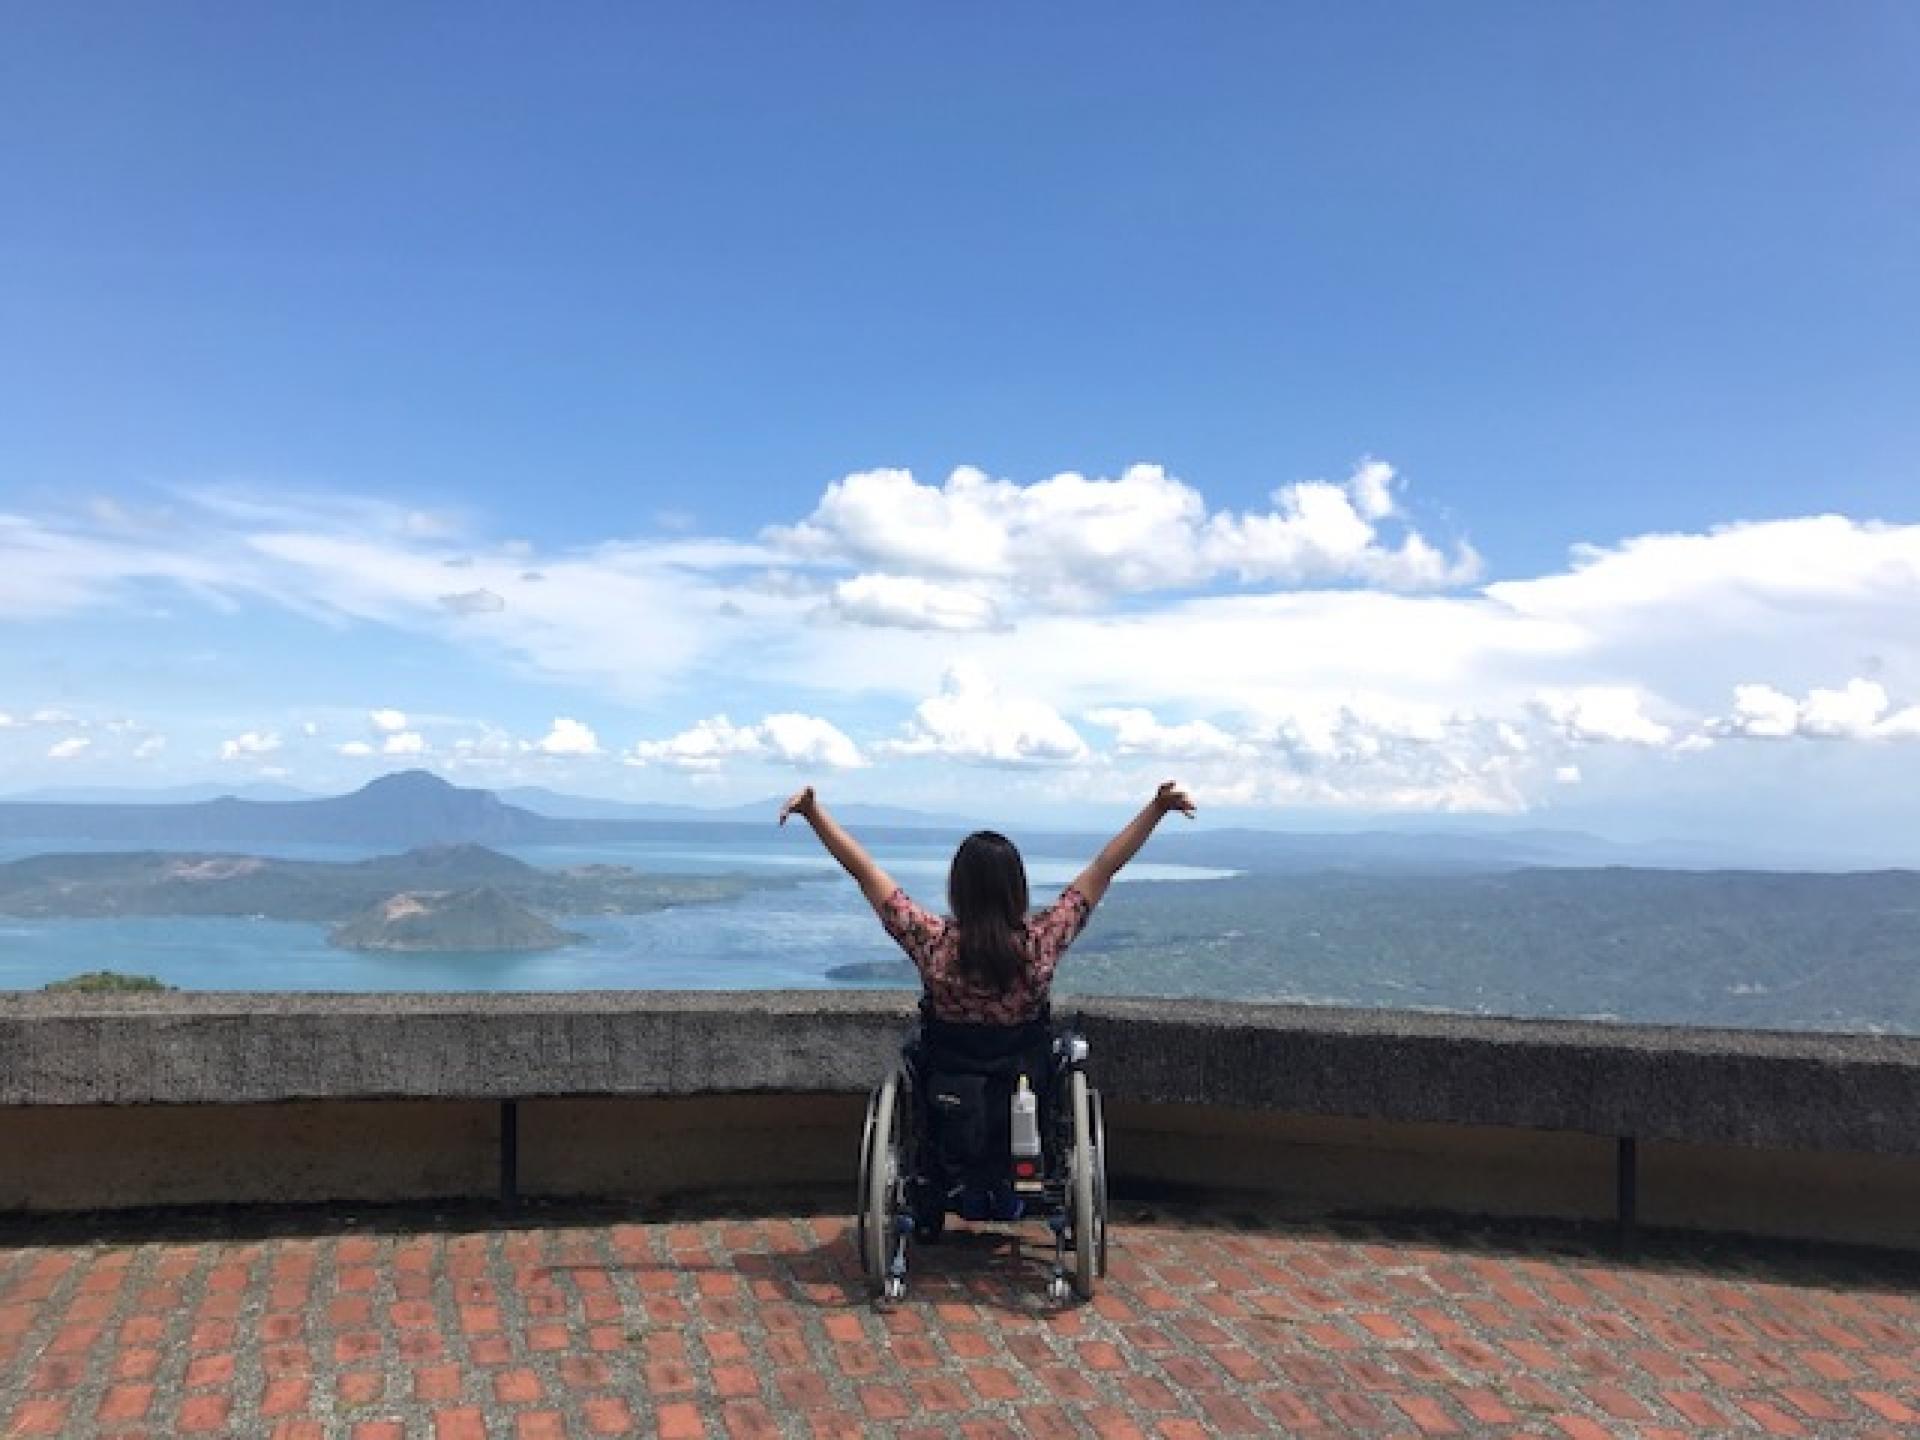 Hong Seo-yoon is a South Korean advocate for accessible tourism